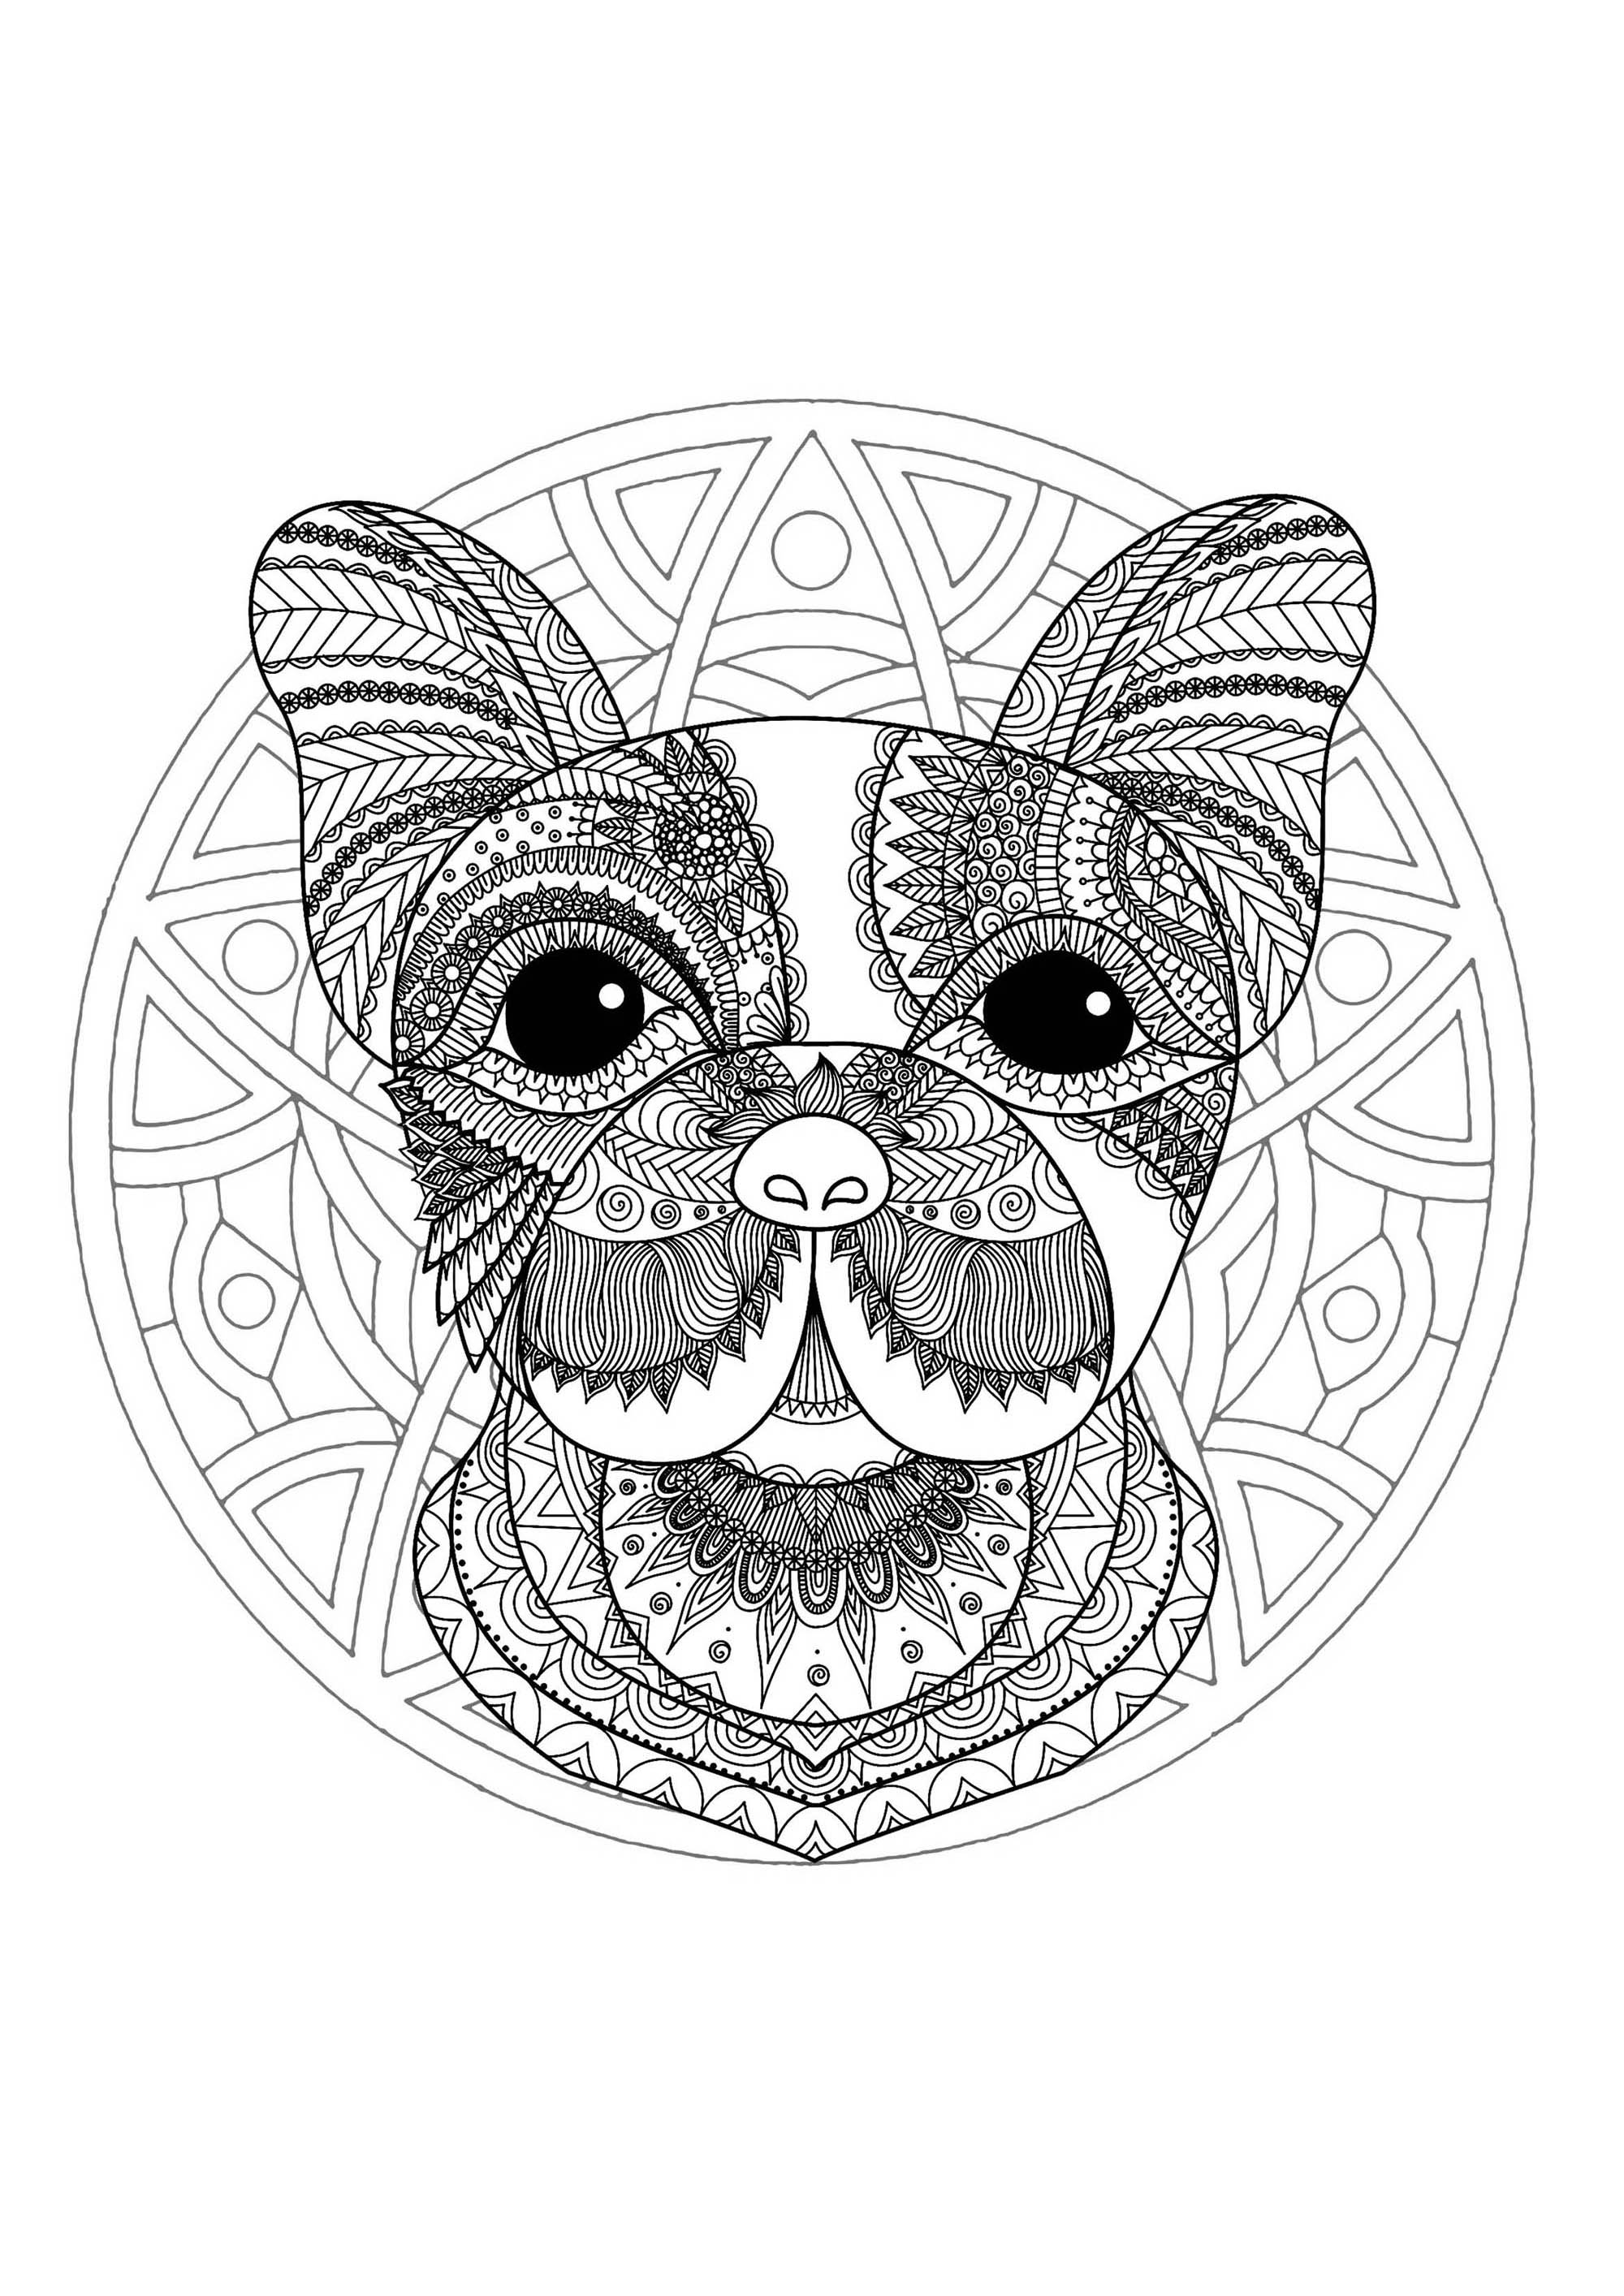 Dog head in a difficult Mandala. Many small details and little areas for a Mandala very original and harmonious. Do whatever it takes to get rid of any distractions that may interfere with your coloring.